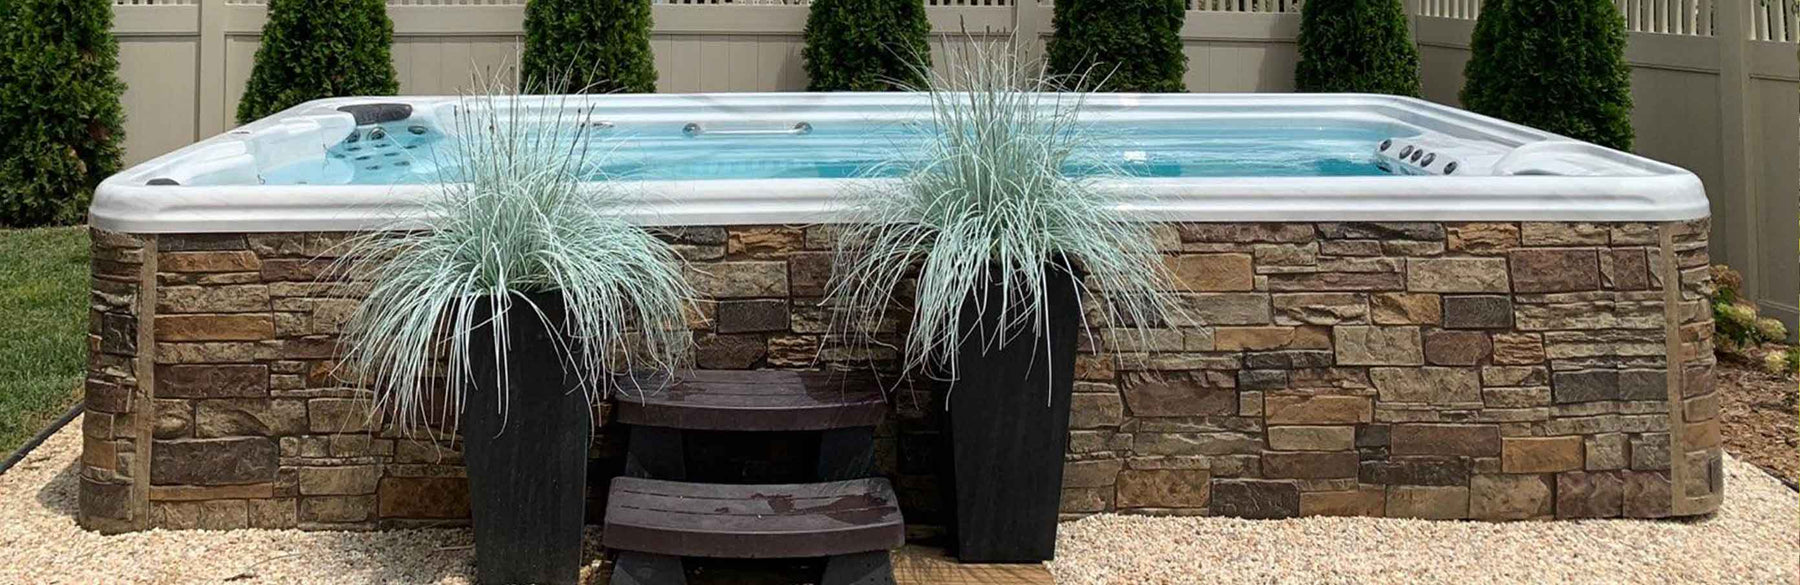 Should I Get An Above-Ground Or In-Ground Hot Tub? - Great Backyard Place